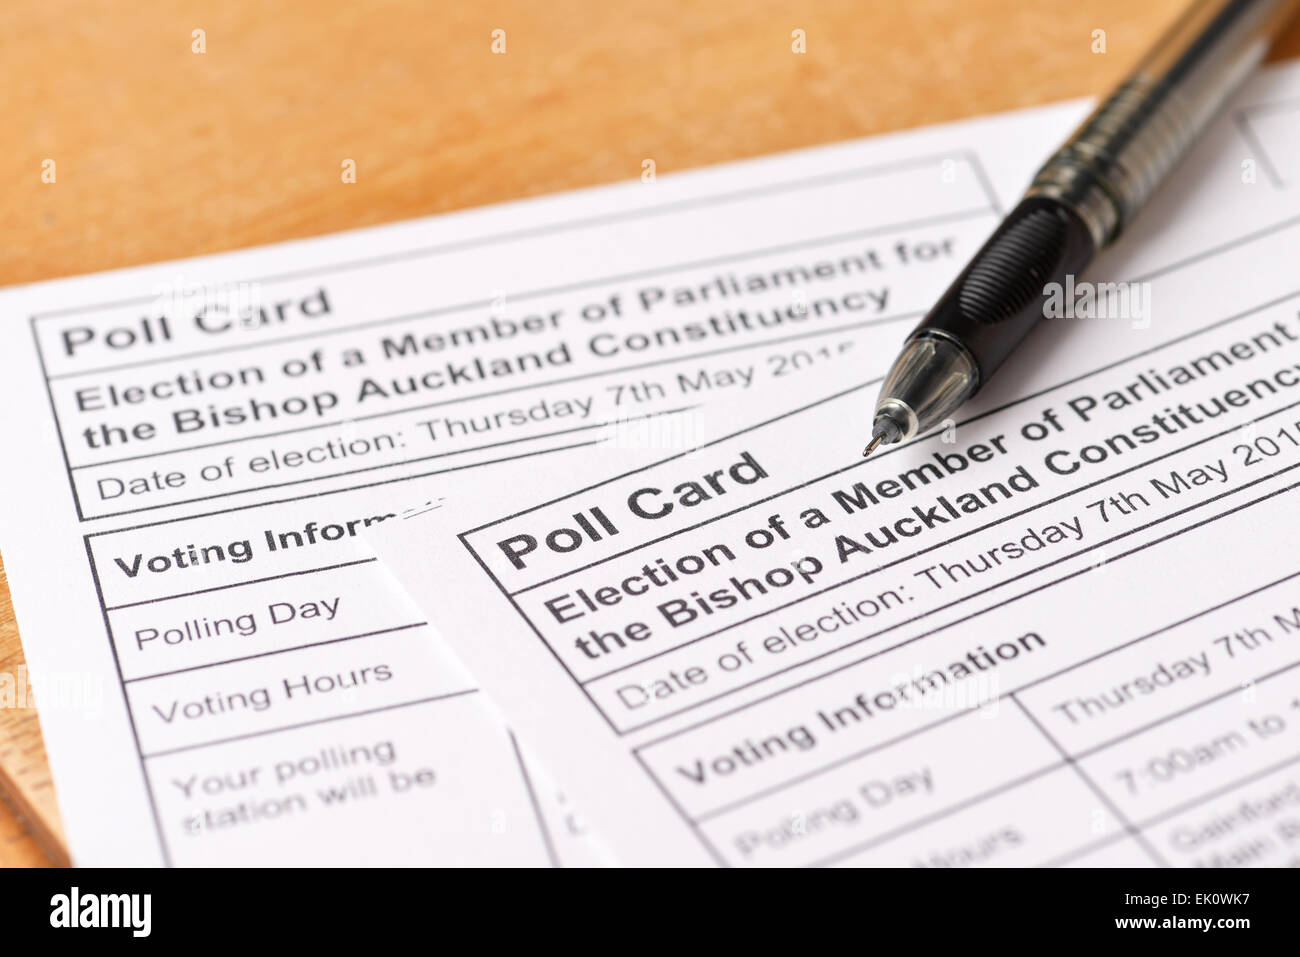 Polling cards for the UK General Election in May 2015 Stock Photo